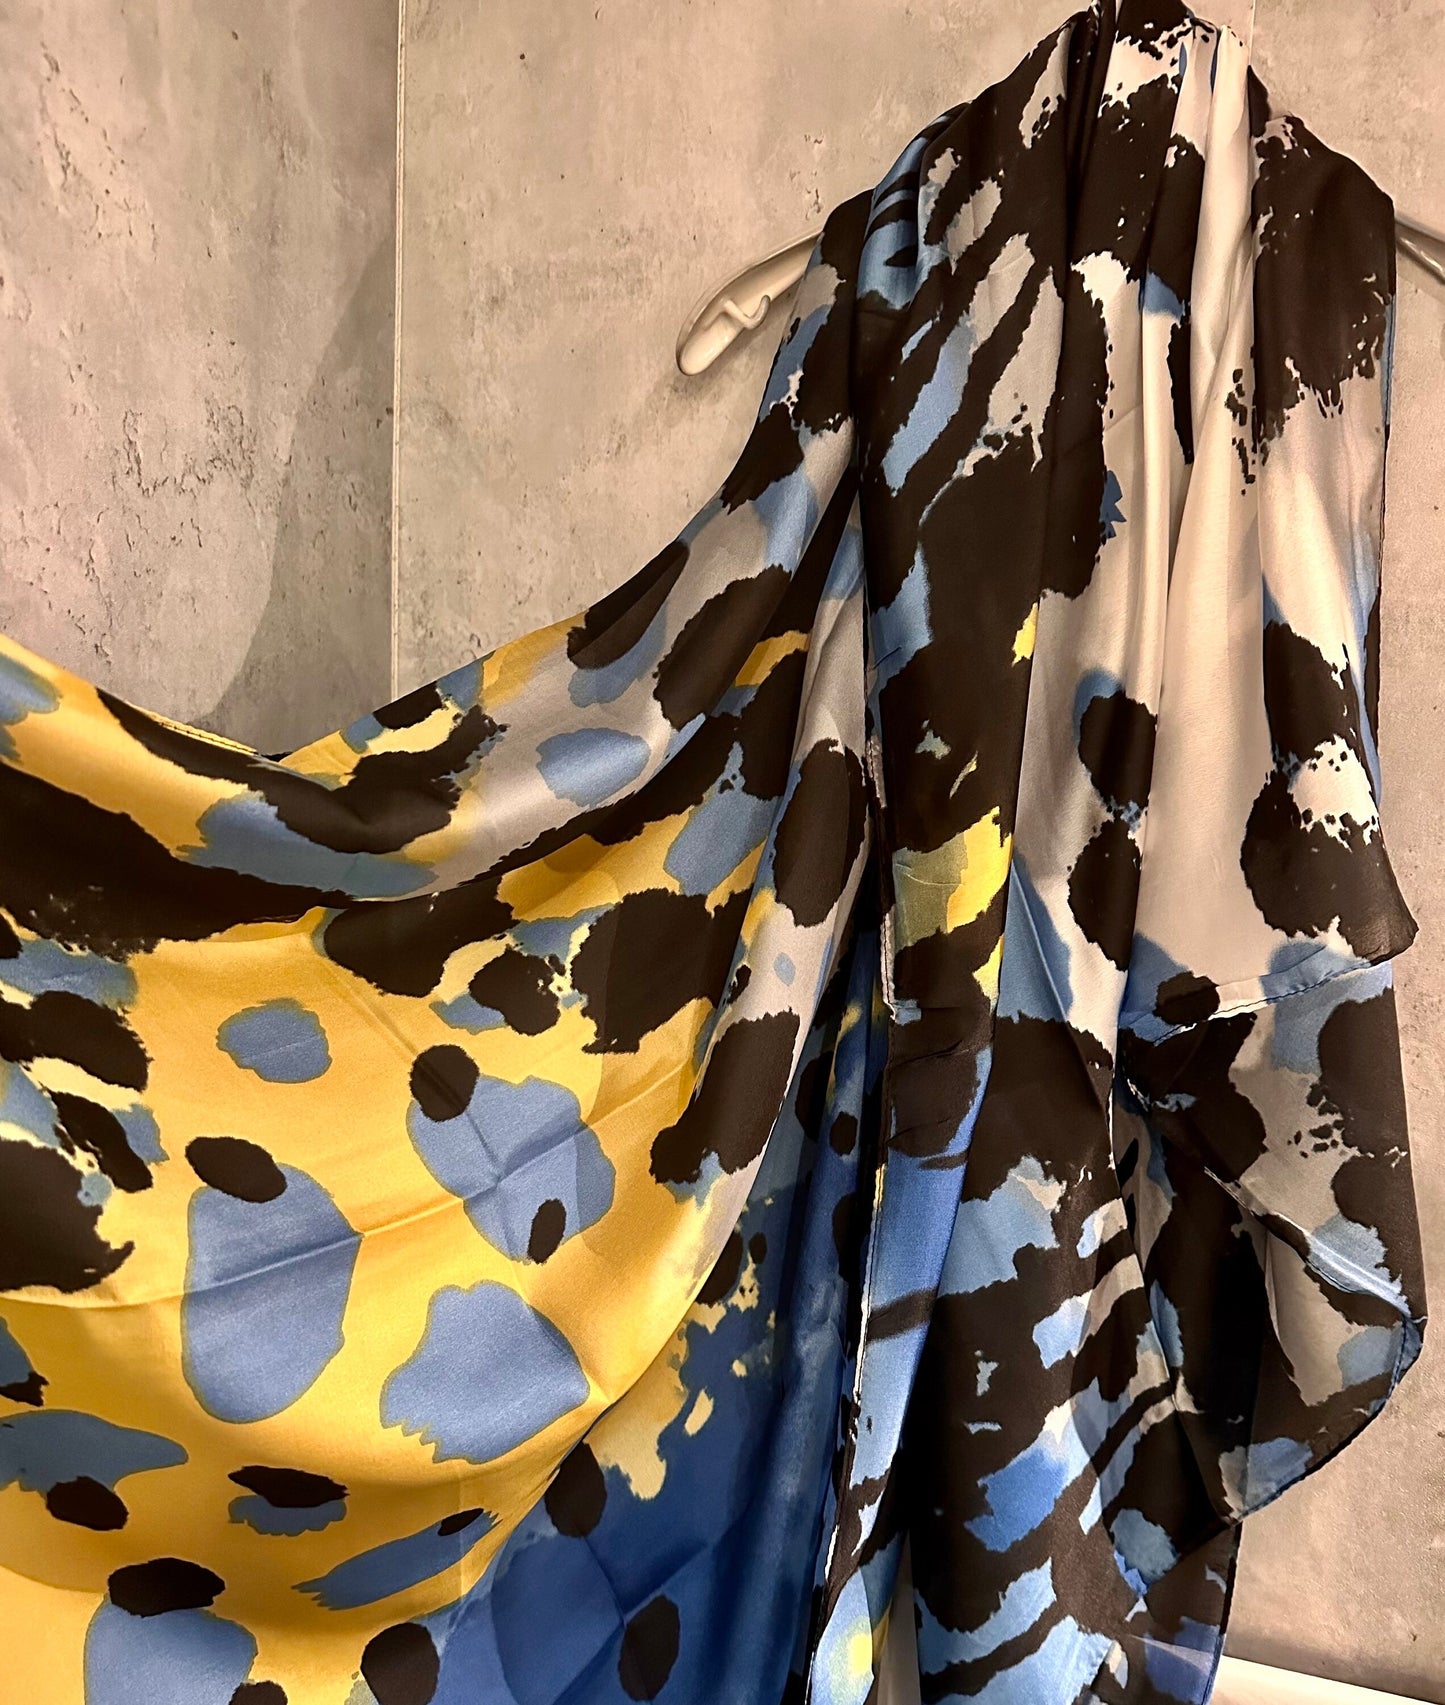 Splotches Color Blue Yellow Silk Scarf/Spring Summer Autumn Scarf/Scarf Women/Gifts For Mom/Gifts For Her Birthday Christmas/UK Seller